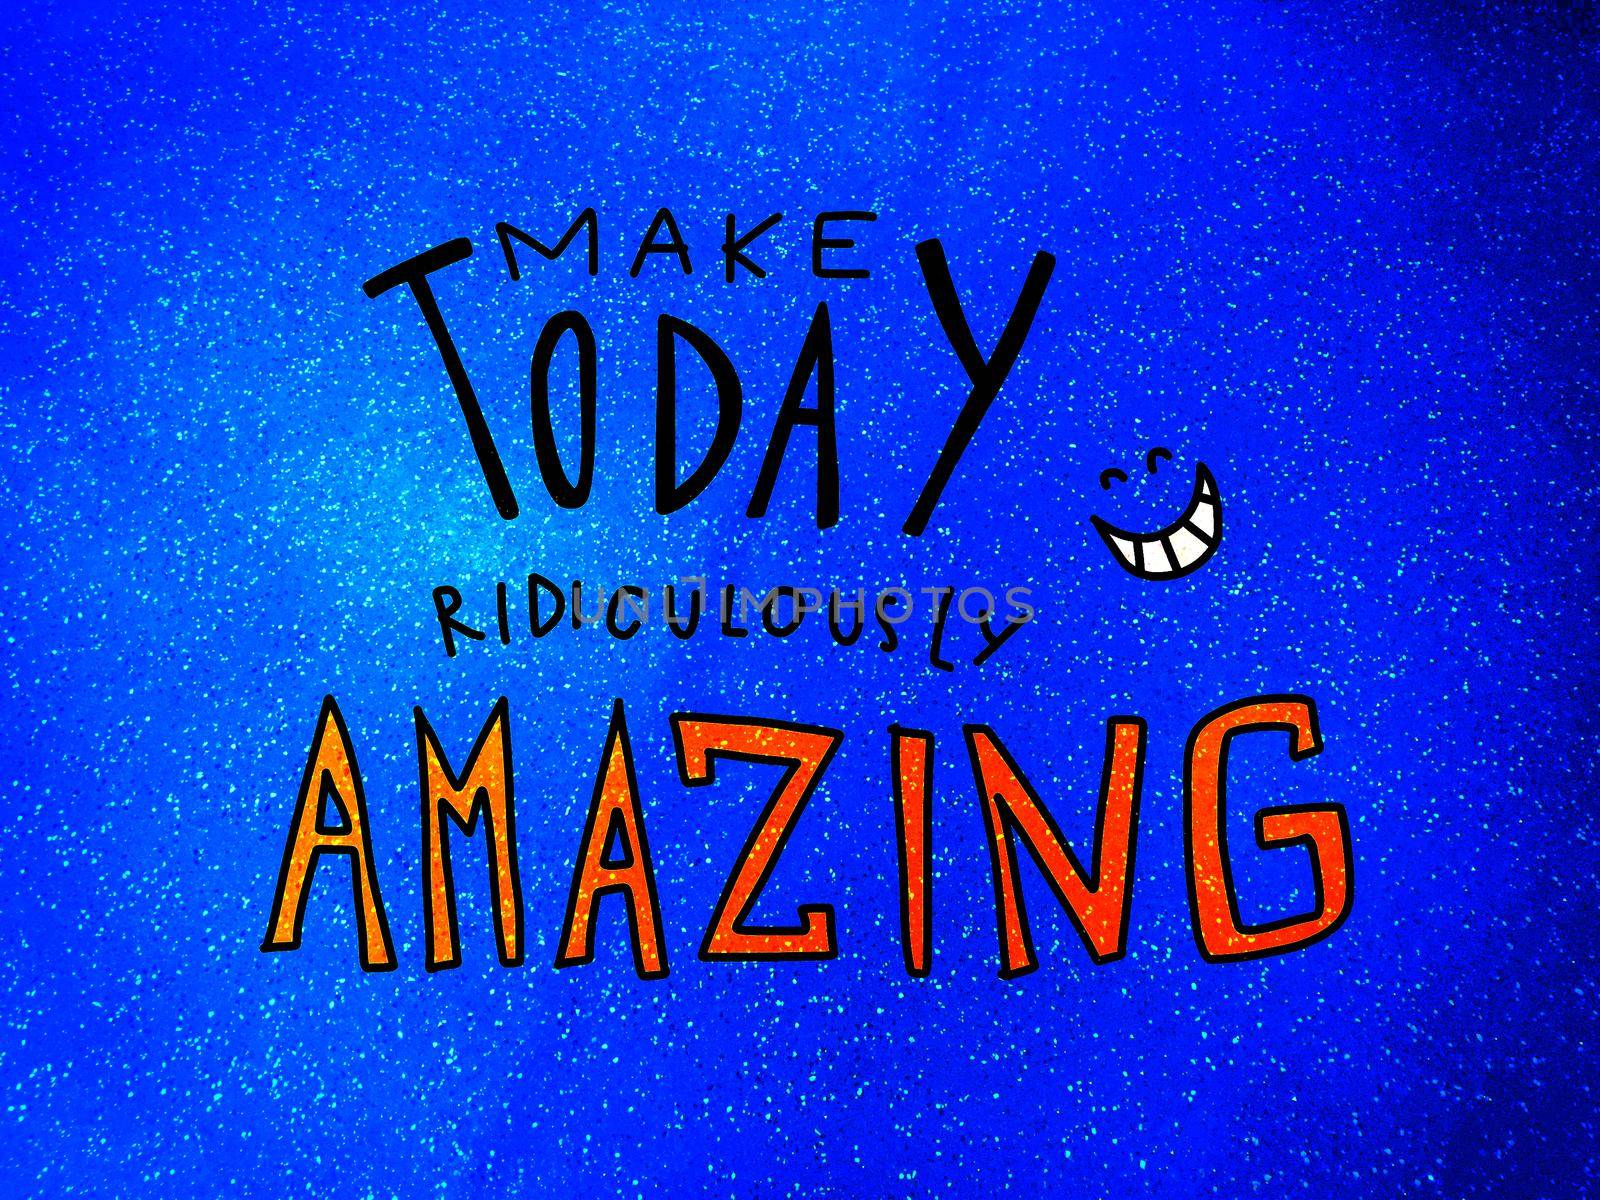 Make today ridiculously amazing word and smile face on dark blue sparkle background illustration by Yoopho